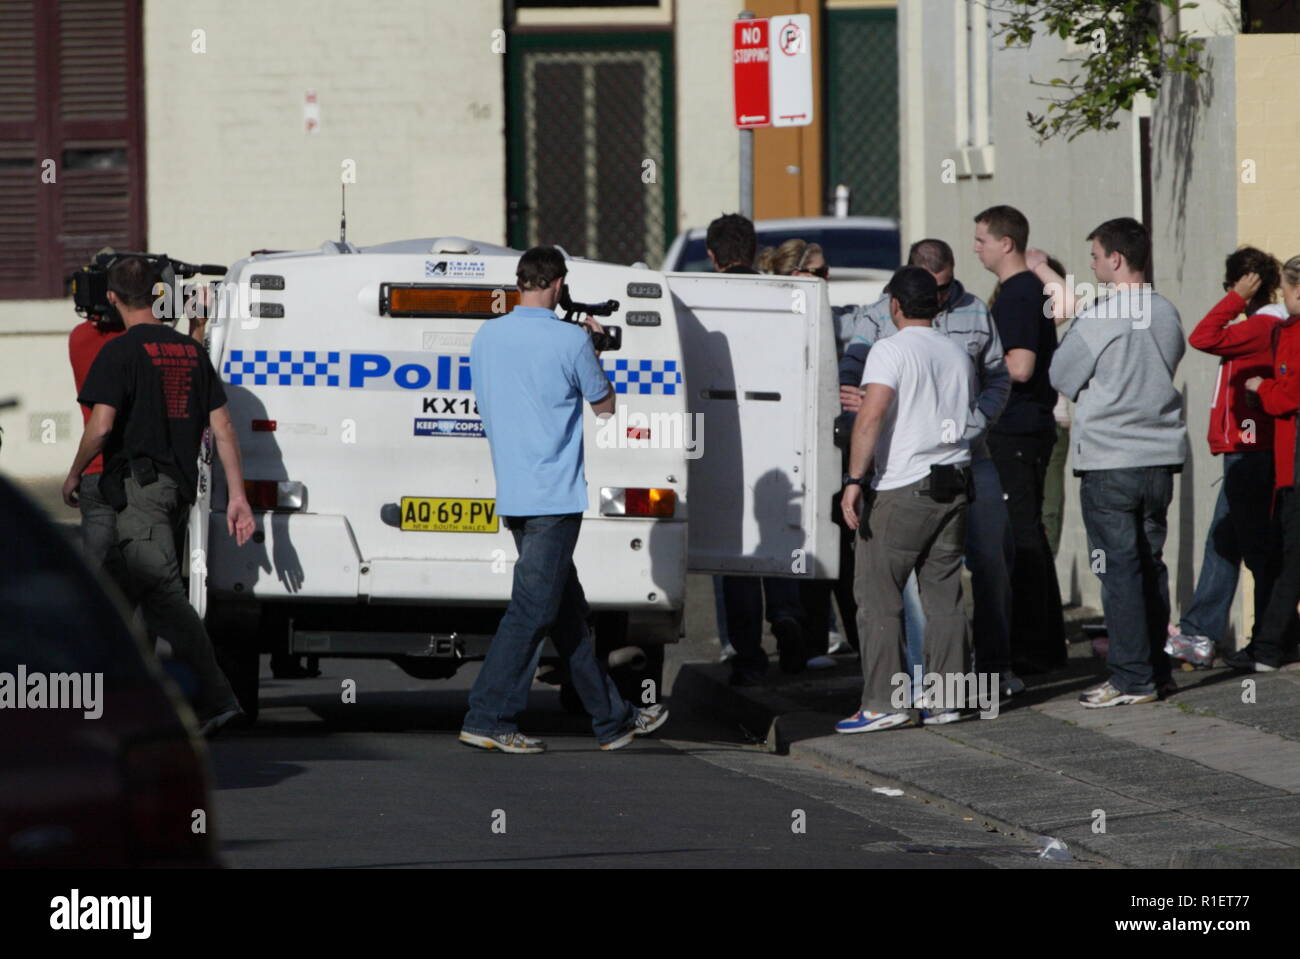 Police investigation in the housing commission projects of Woolloomooloo in Sydney, Australia, while a film crew records the activities for television. Stock Photo